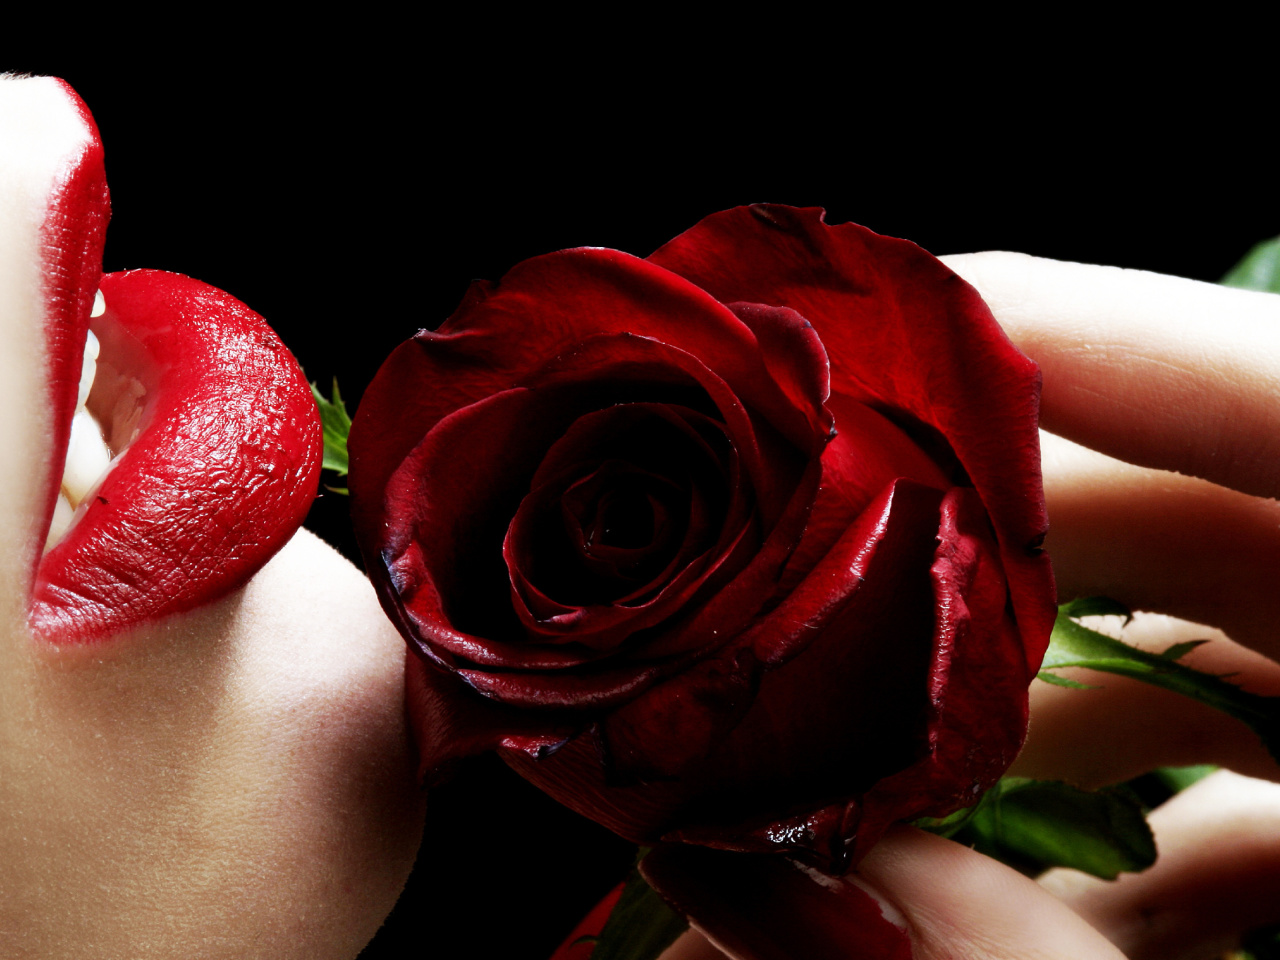 Das Red Rose and Lipstick Wallpaper 1280x960